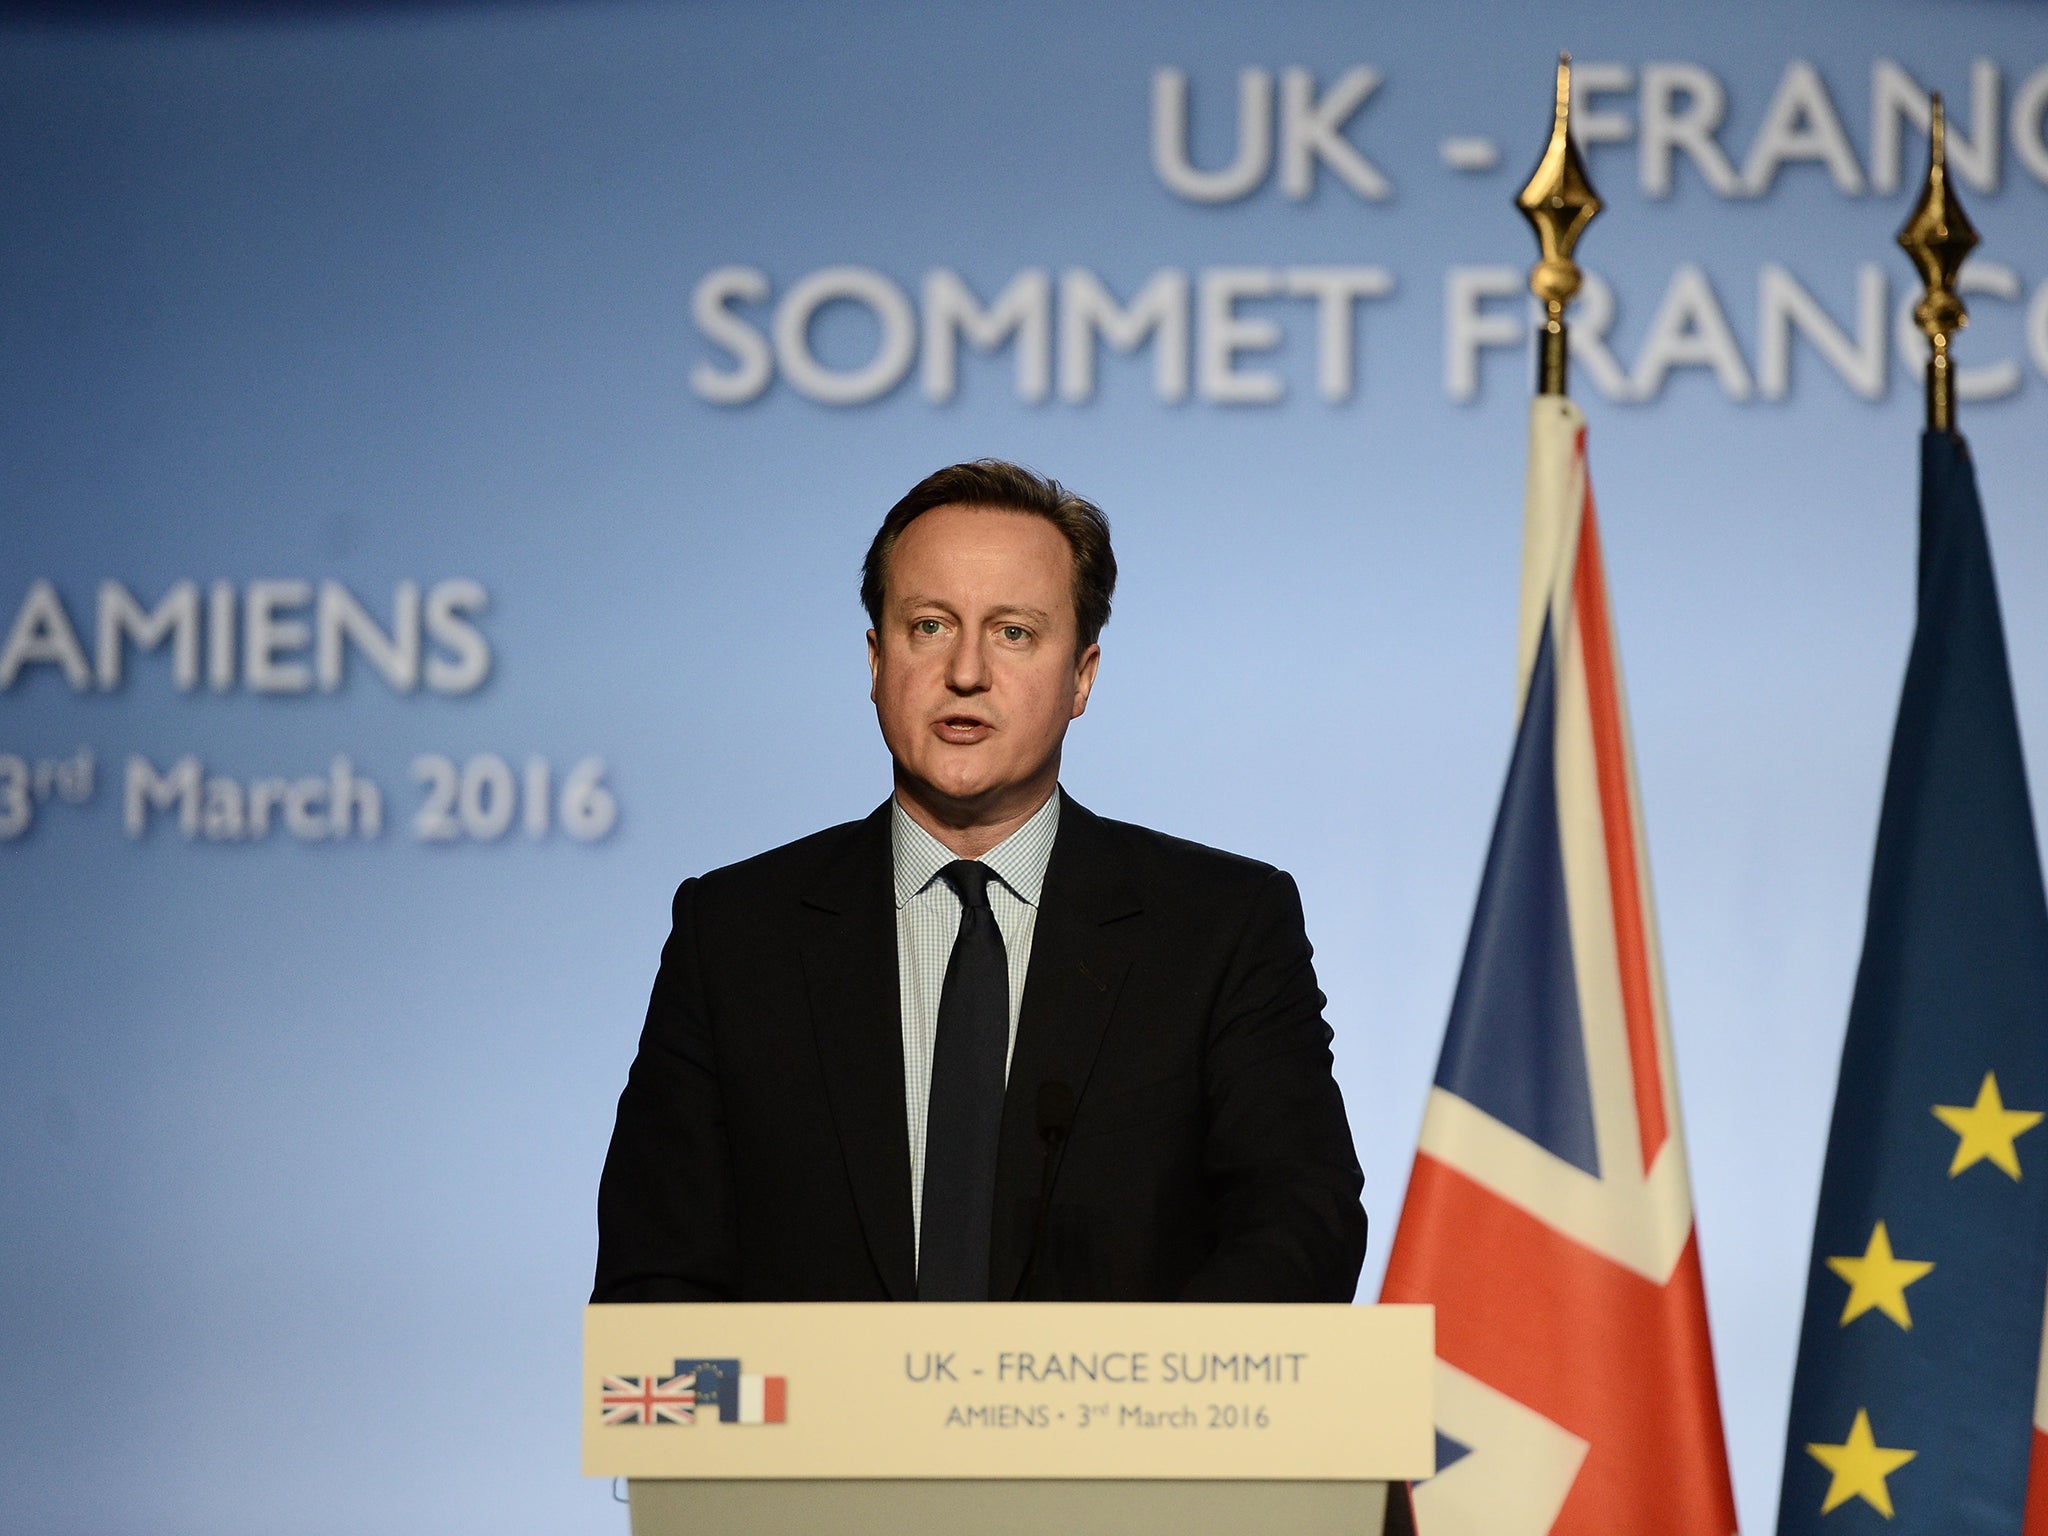 David Cameron gives a press conference at the Musee de Picardie in Amiens, northern France, during the 34th Franco-British summit.